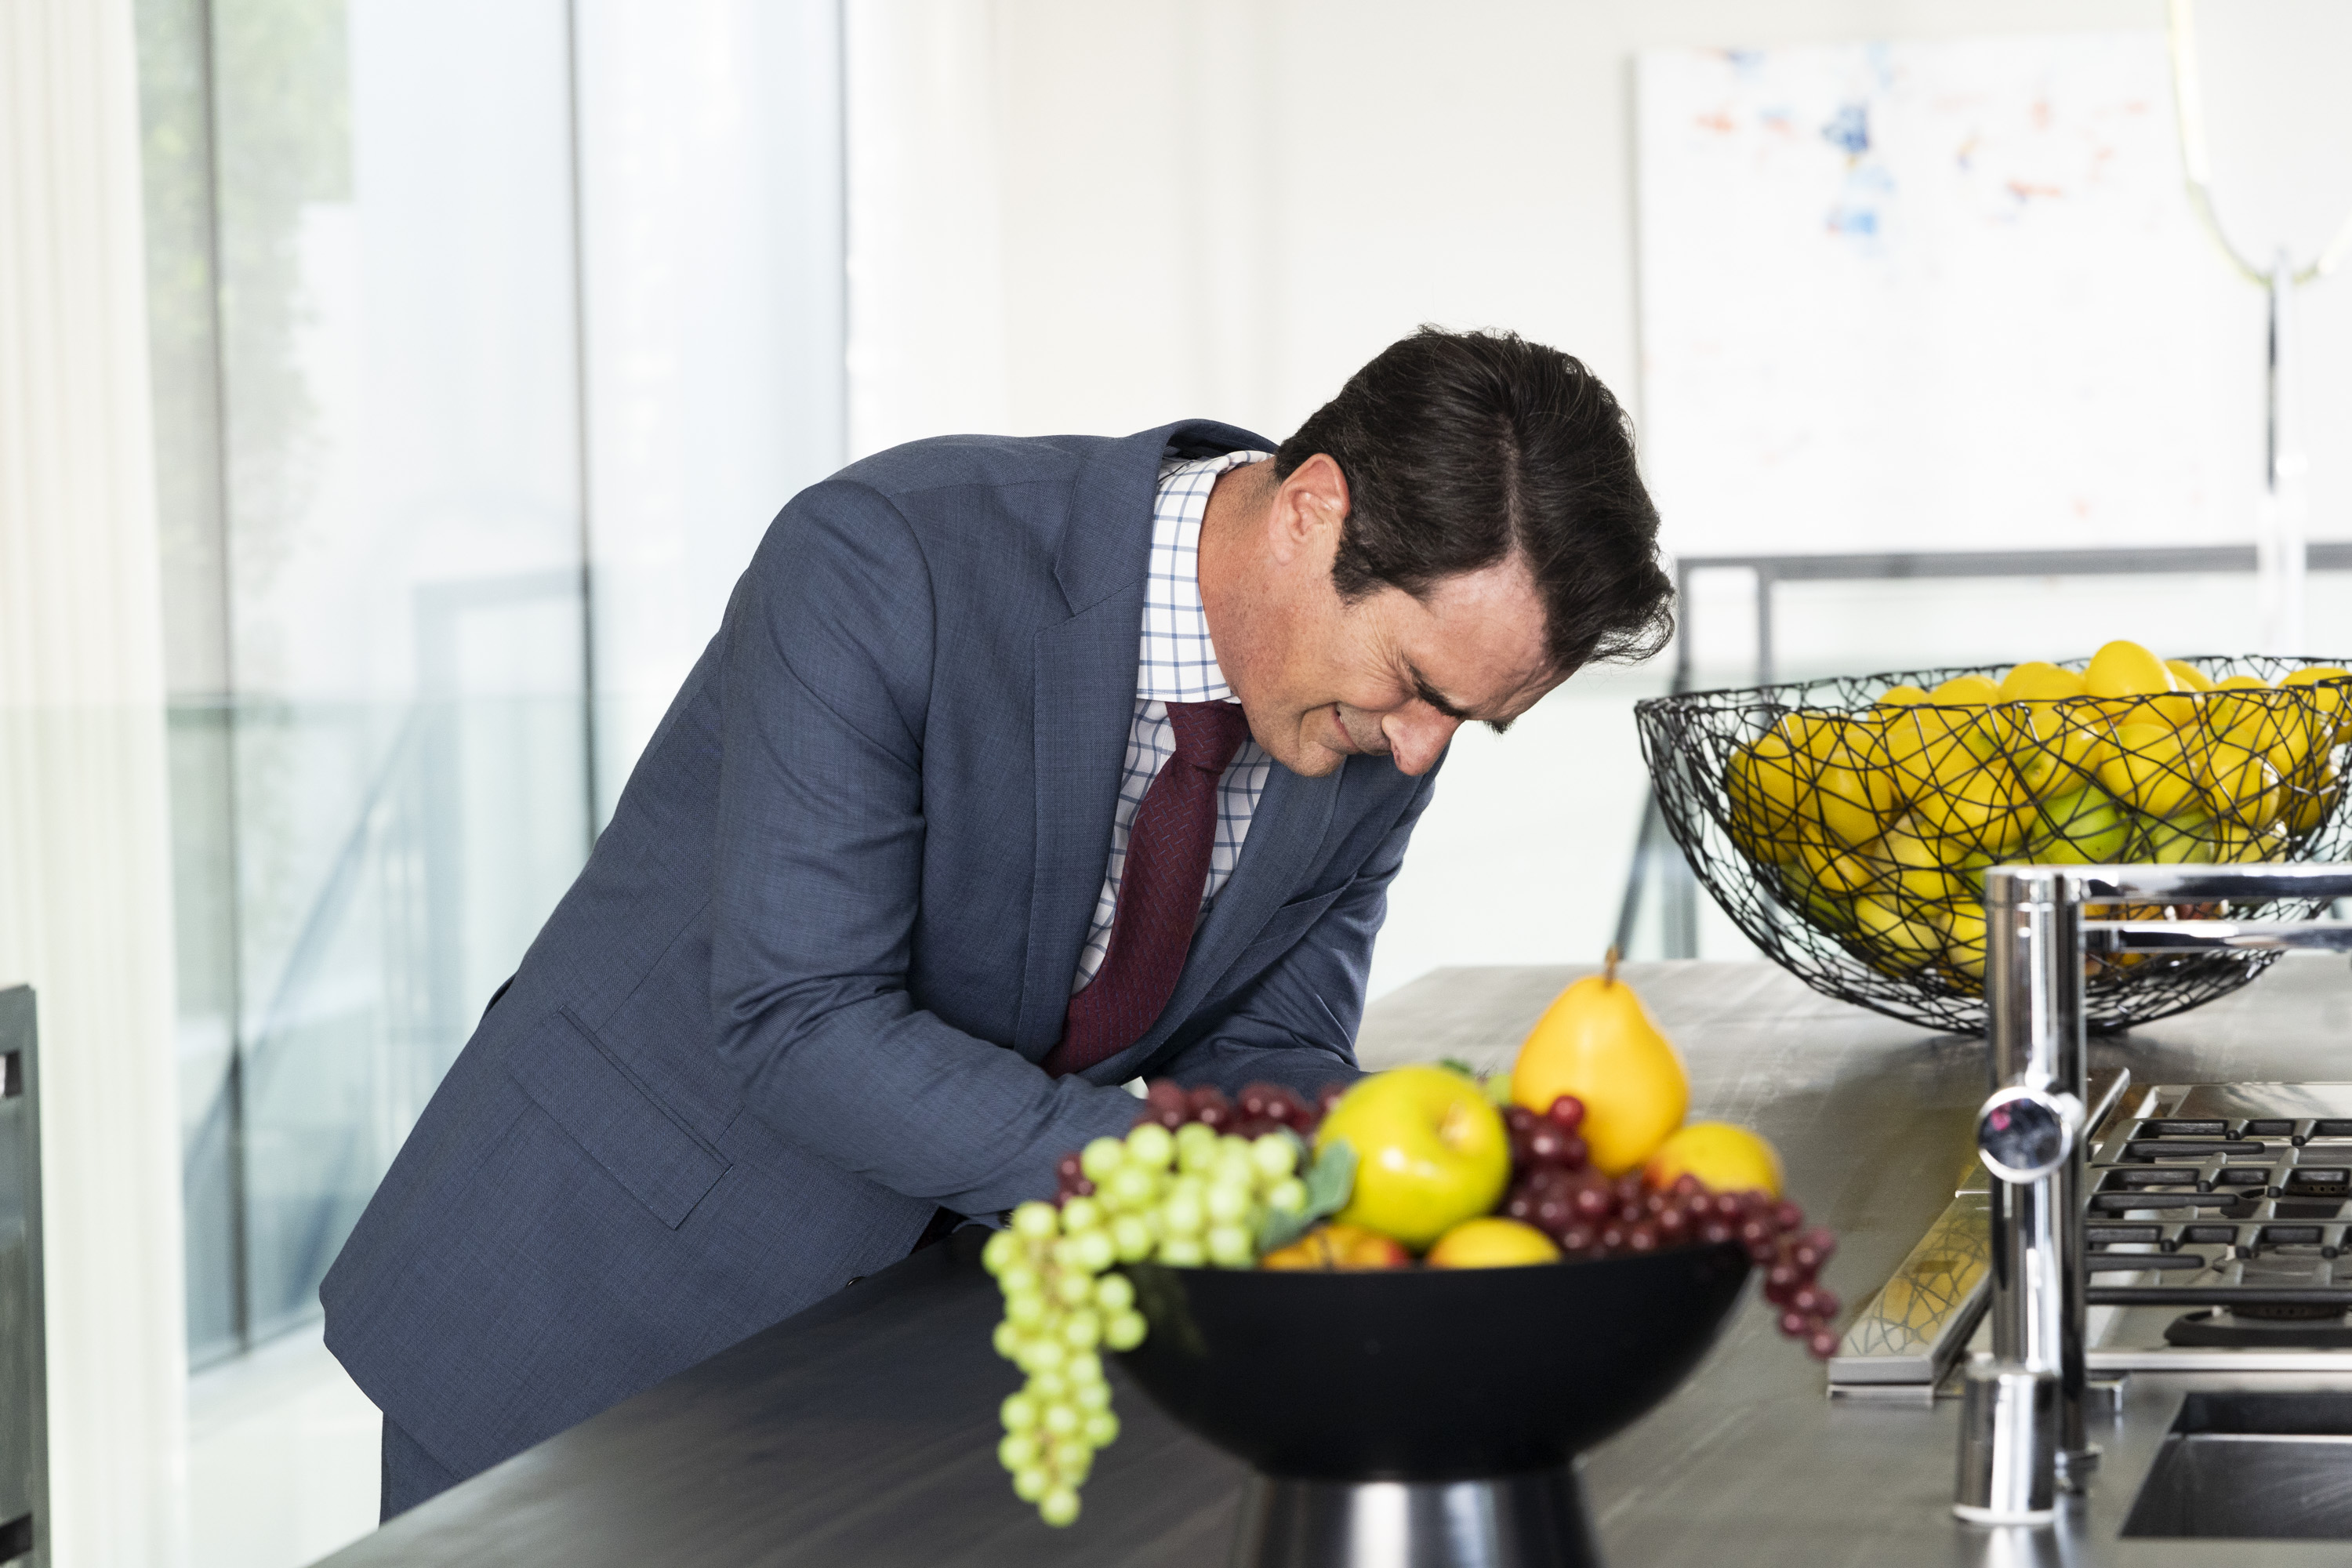 Ty Burrell playing the role of Phil Dunphy on "Modern Family" season 10 | Source: Getty Images